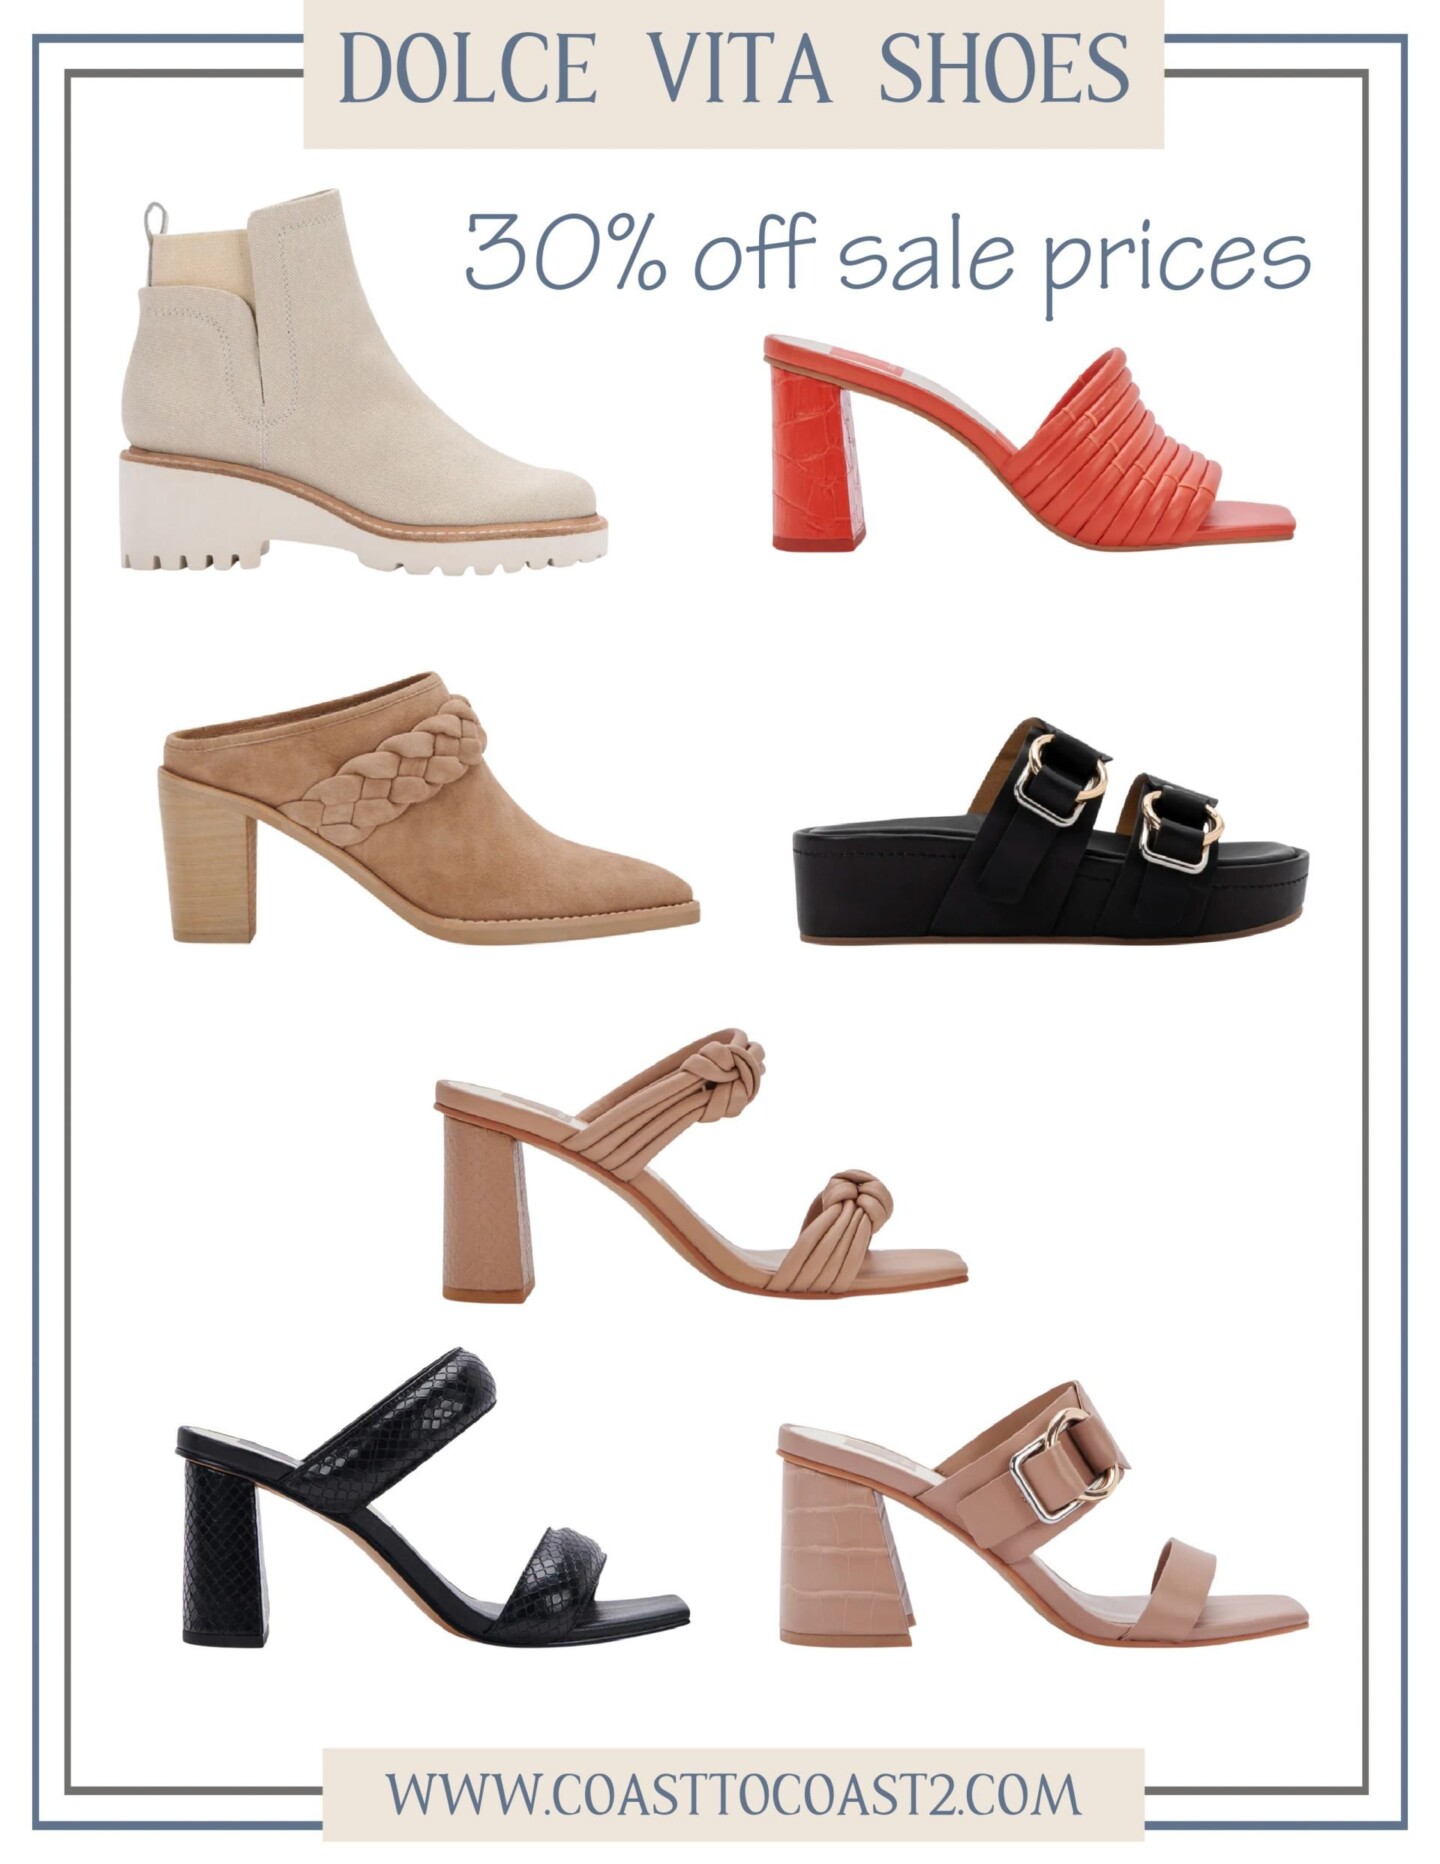 October Sale round up at Dolce Vita